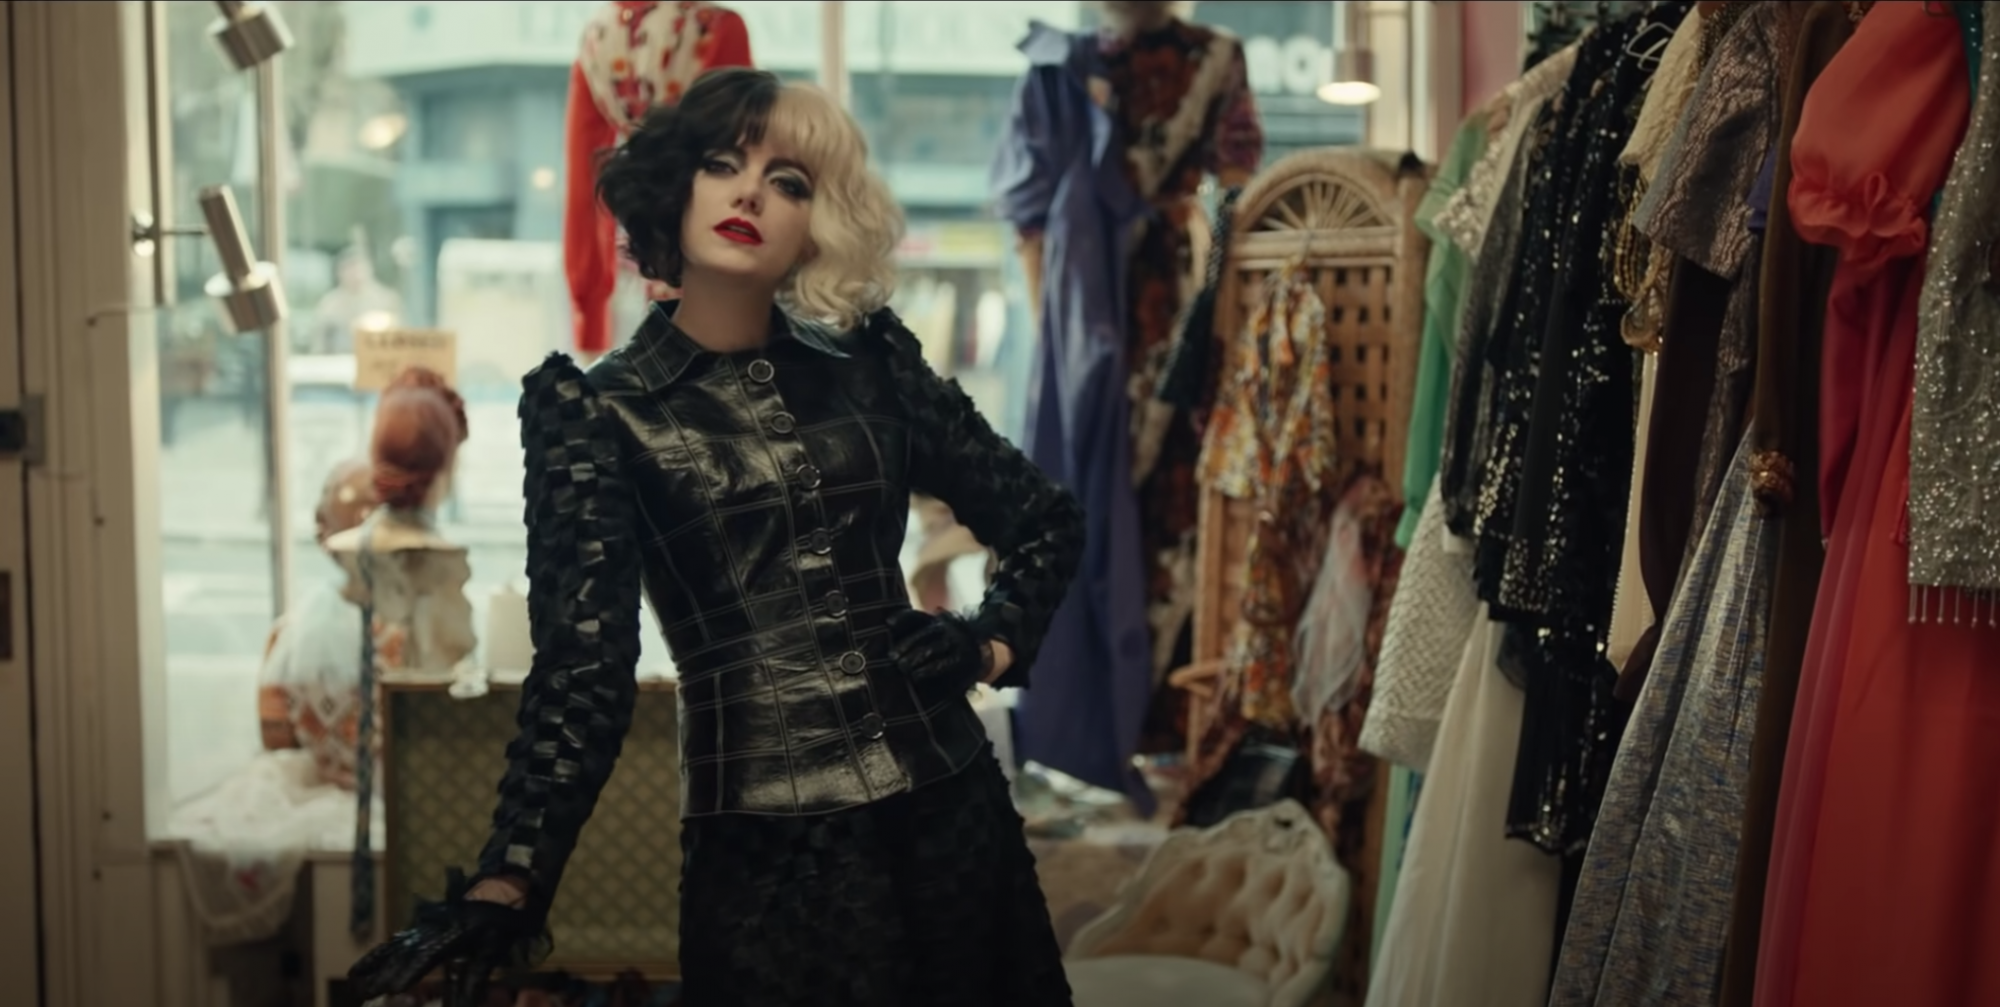 Disney’s Cruella: All The Outfits We’re Excited To See On Emma Stone